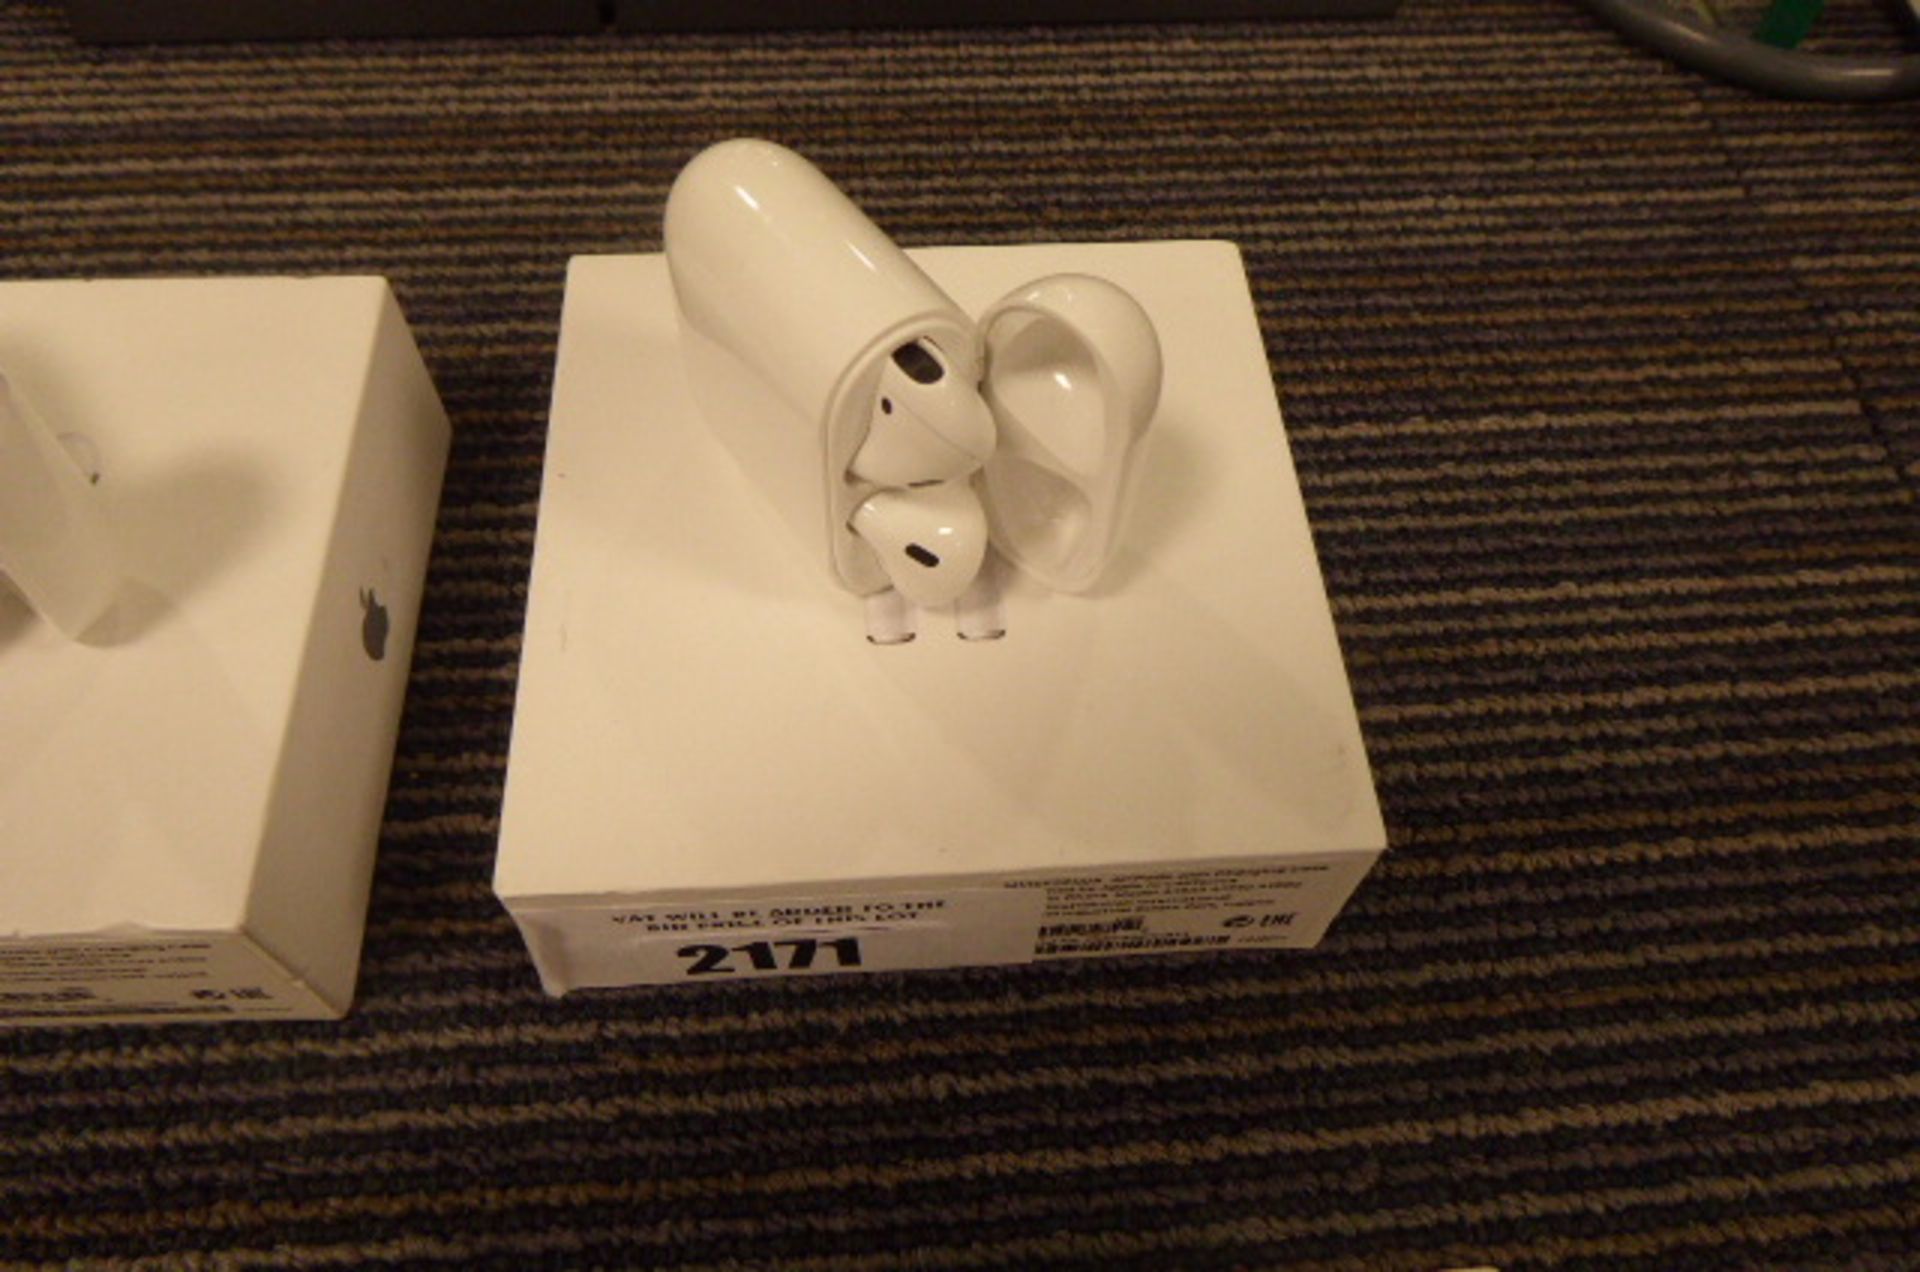 Apple air pods with charging case and box